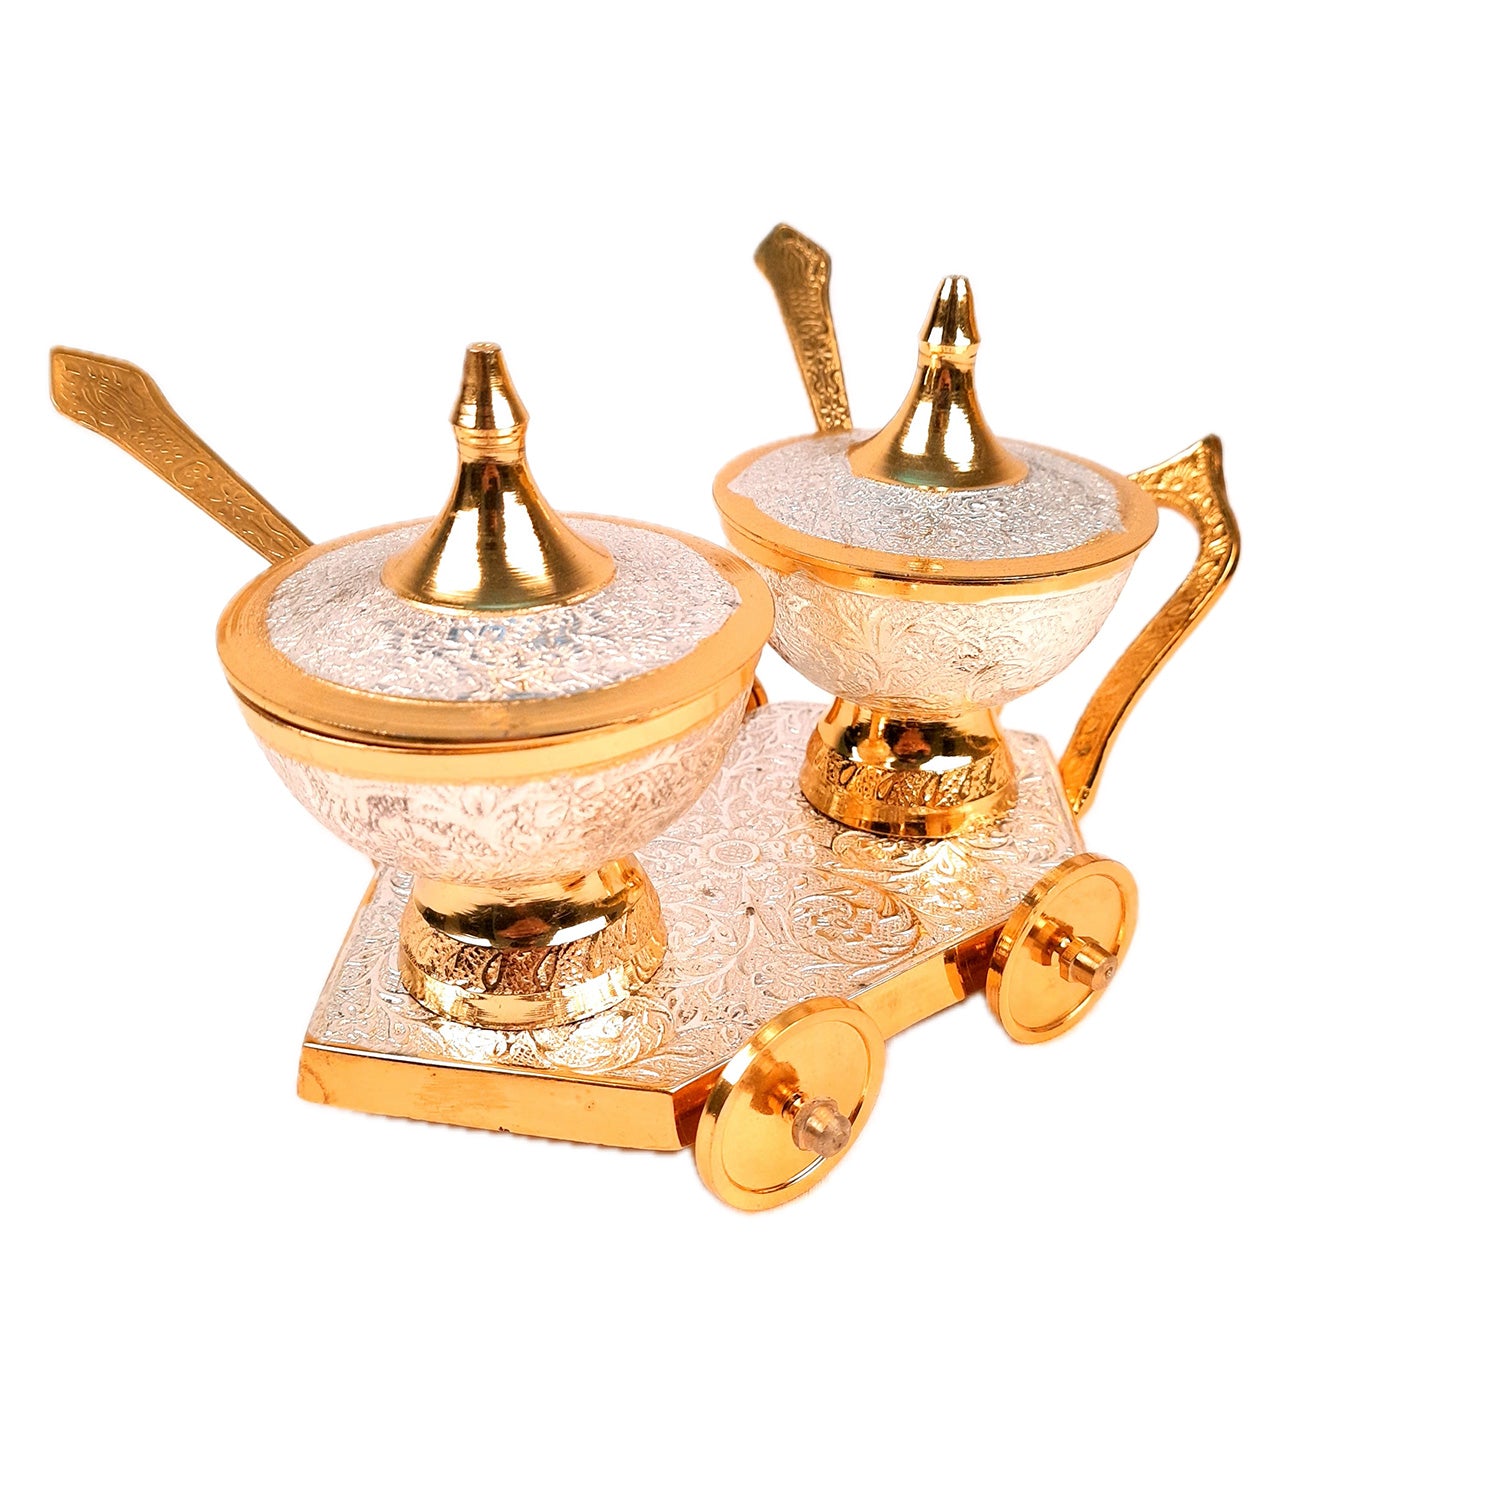 Dry Fruit Serving Bowls With Trolley | Mukhwas Bowl With Cart - For Dry Fruit, Chocolates, Mouth Freshener | Wedding & Diwali Gift Set - (LxH - 9x5 Inch) - Apkamart